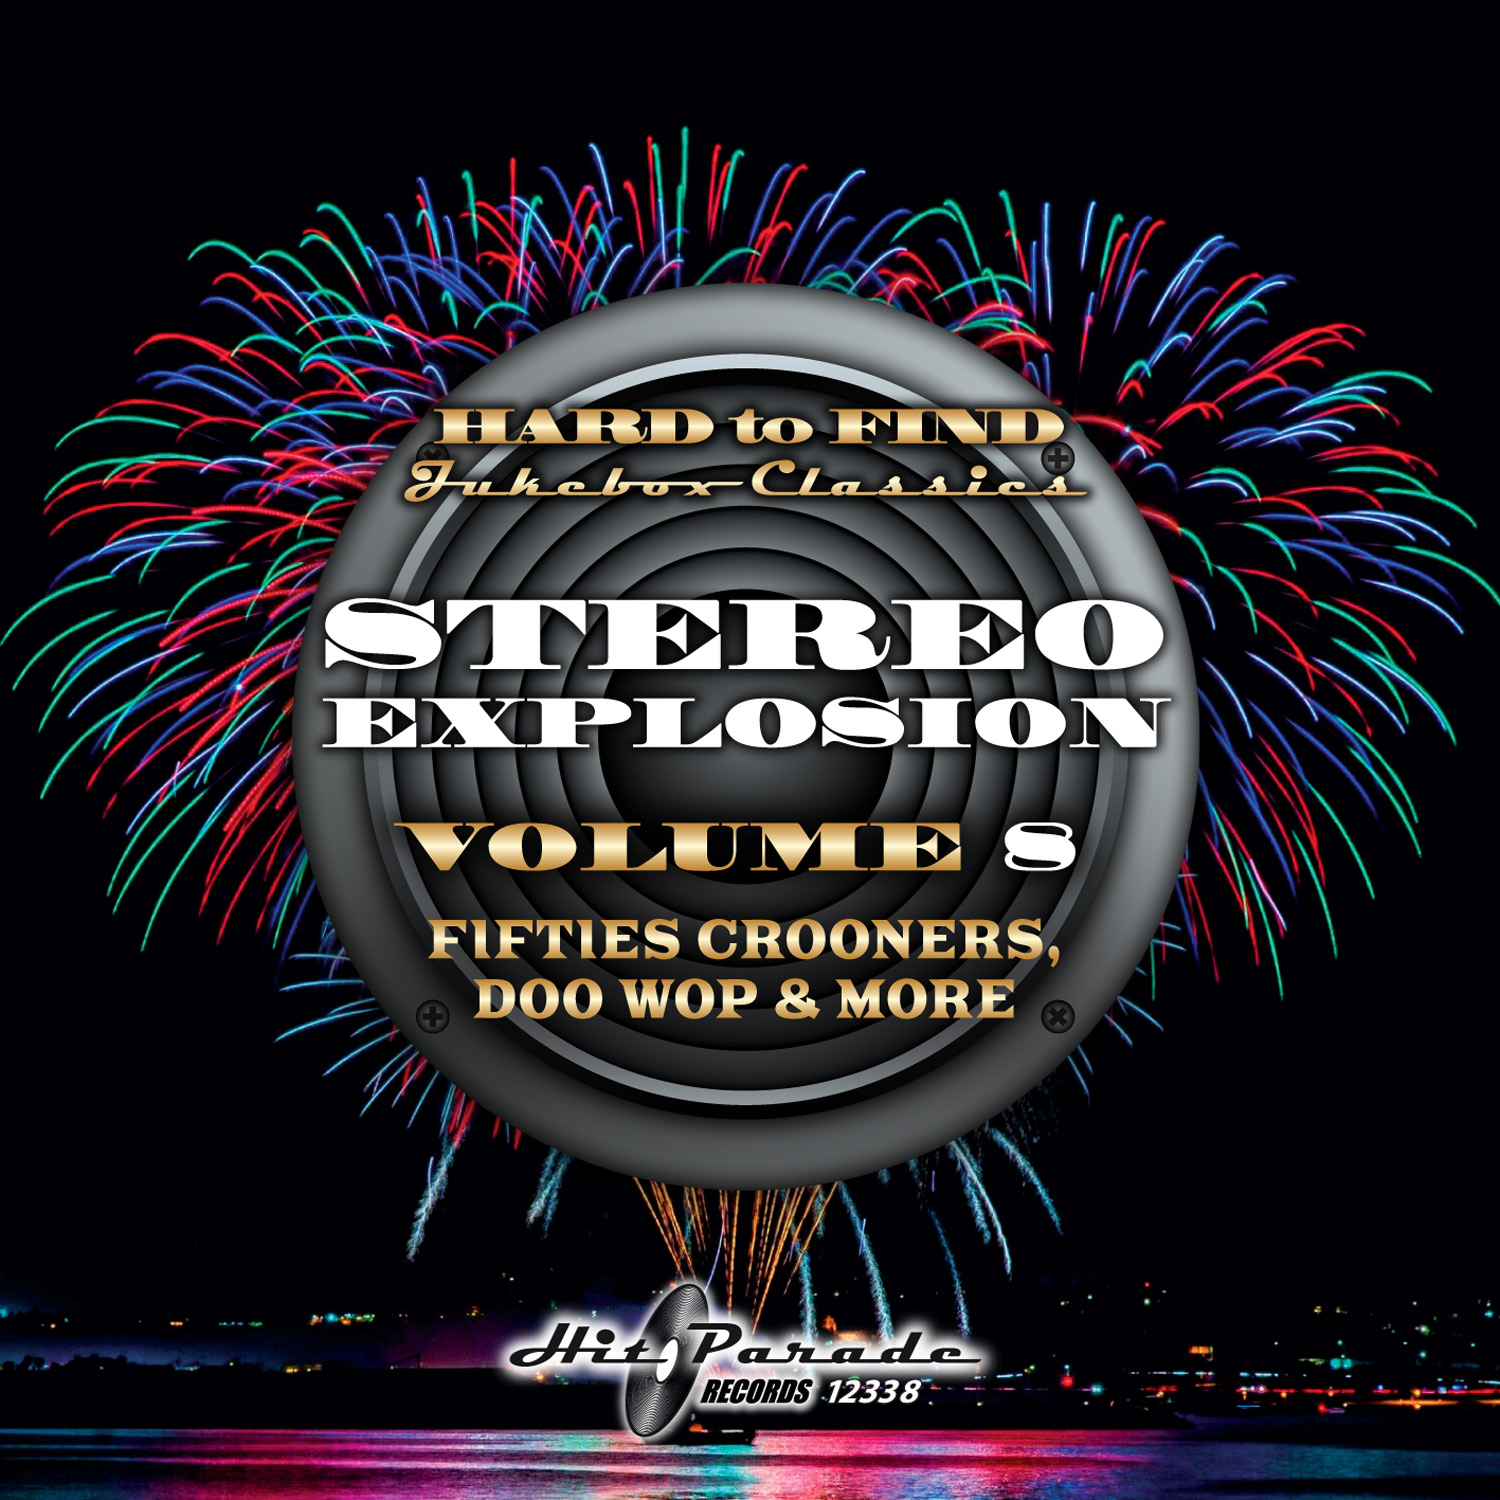 Hard to Find Jukebox Classics -
                  Stereo Explosion Volume 8:<br>Crooners, Doo Wop & More